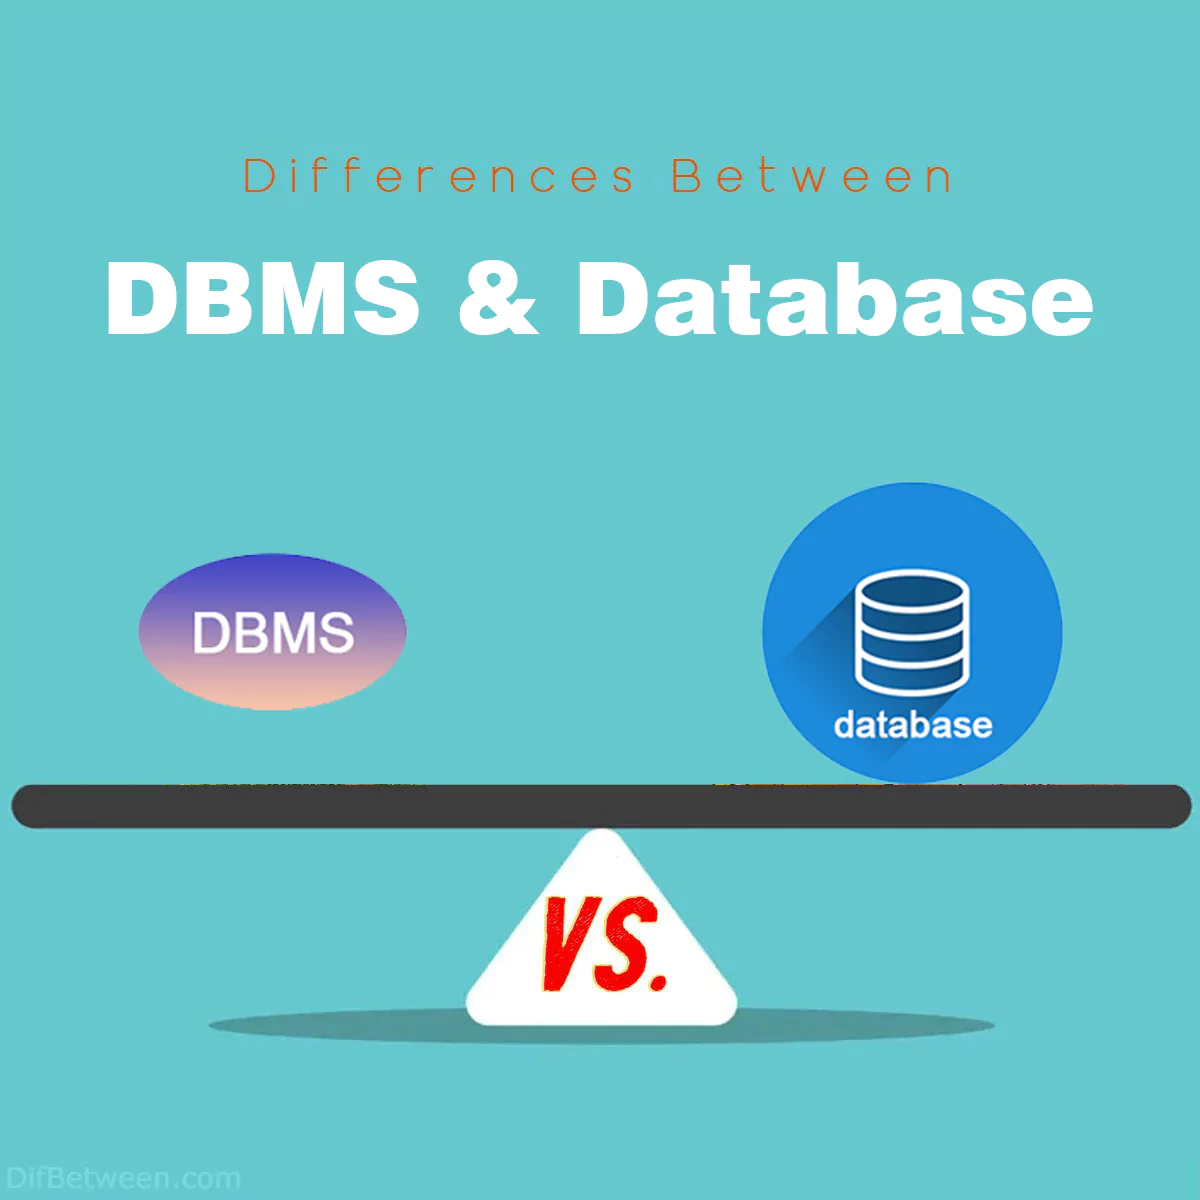 Differences Between DBMS and Database